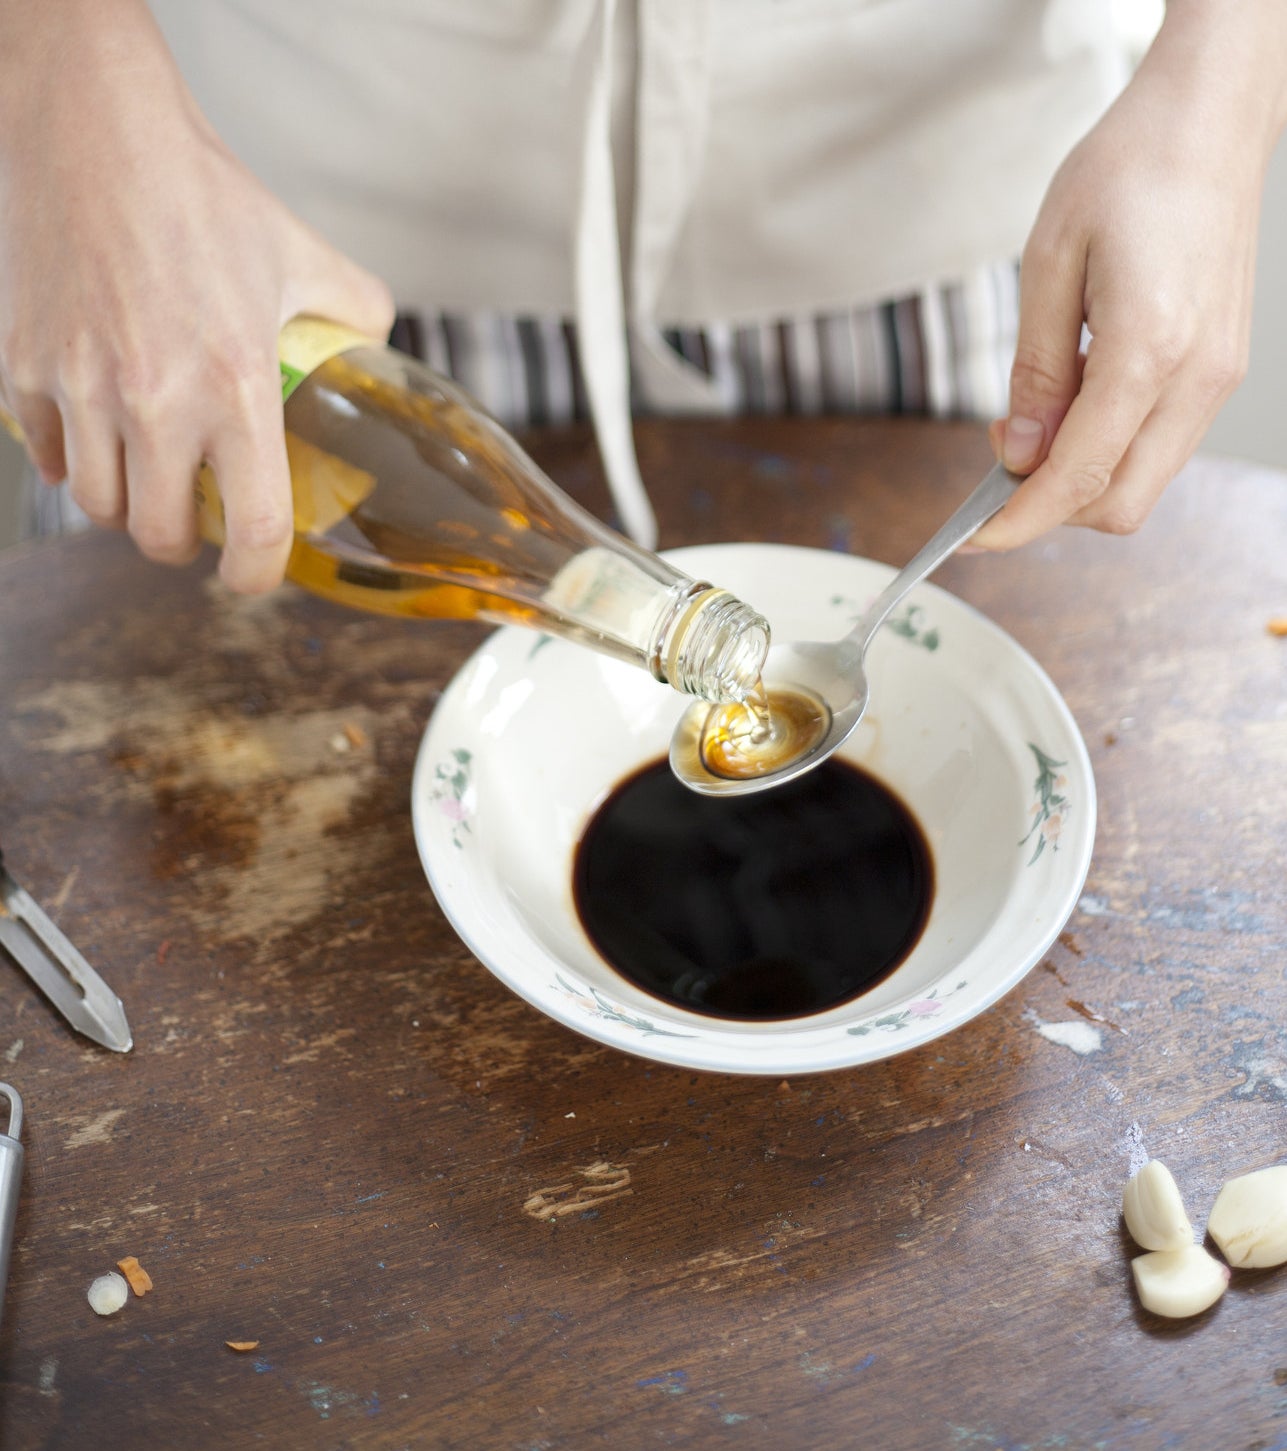 Pouring vinegar into soy sauce